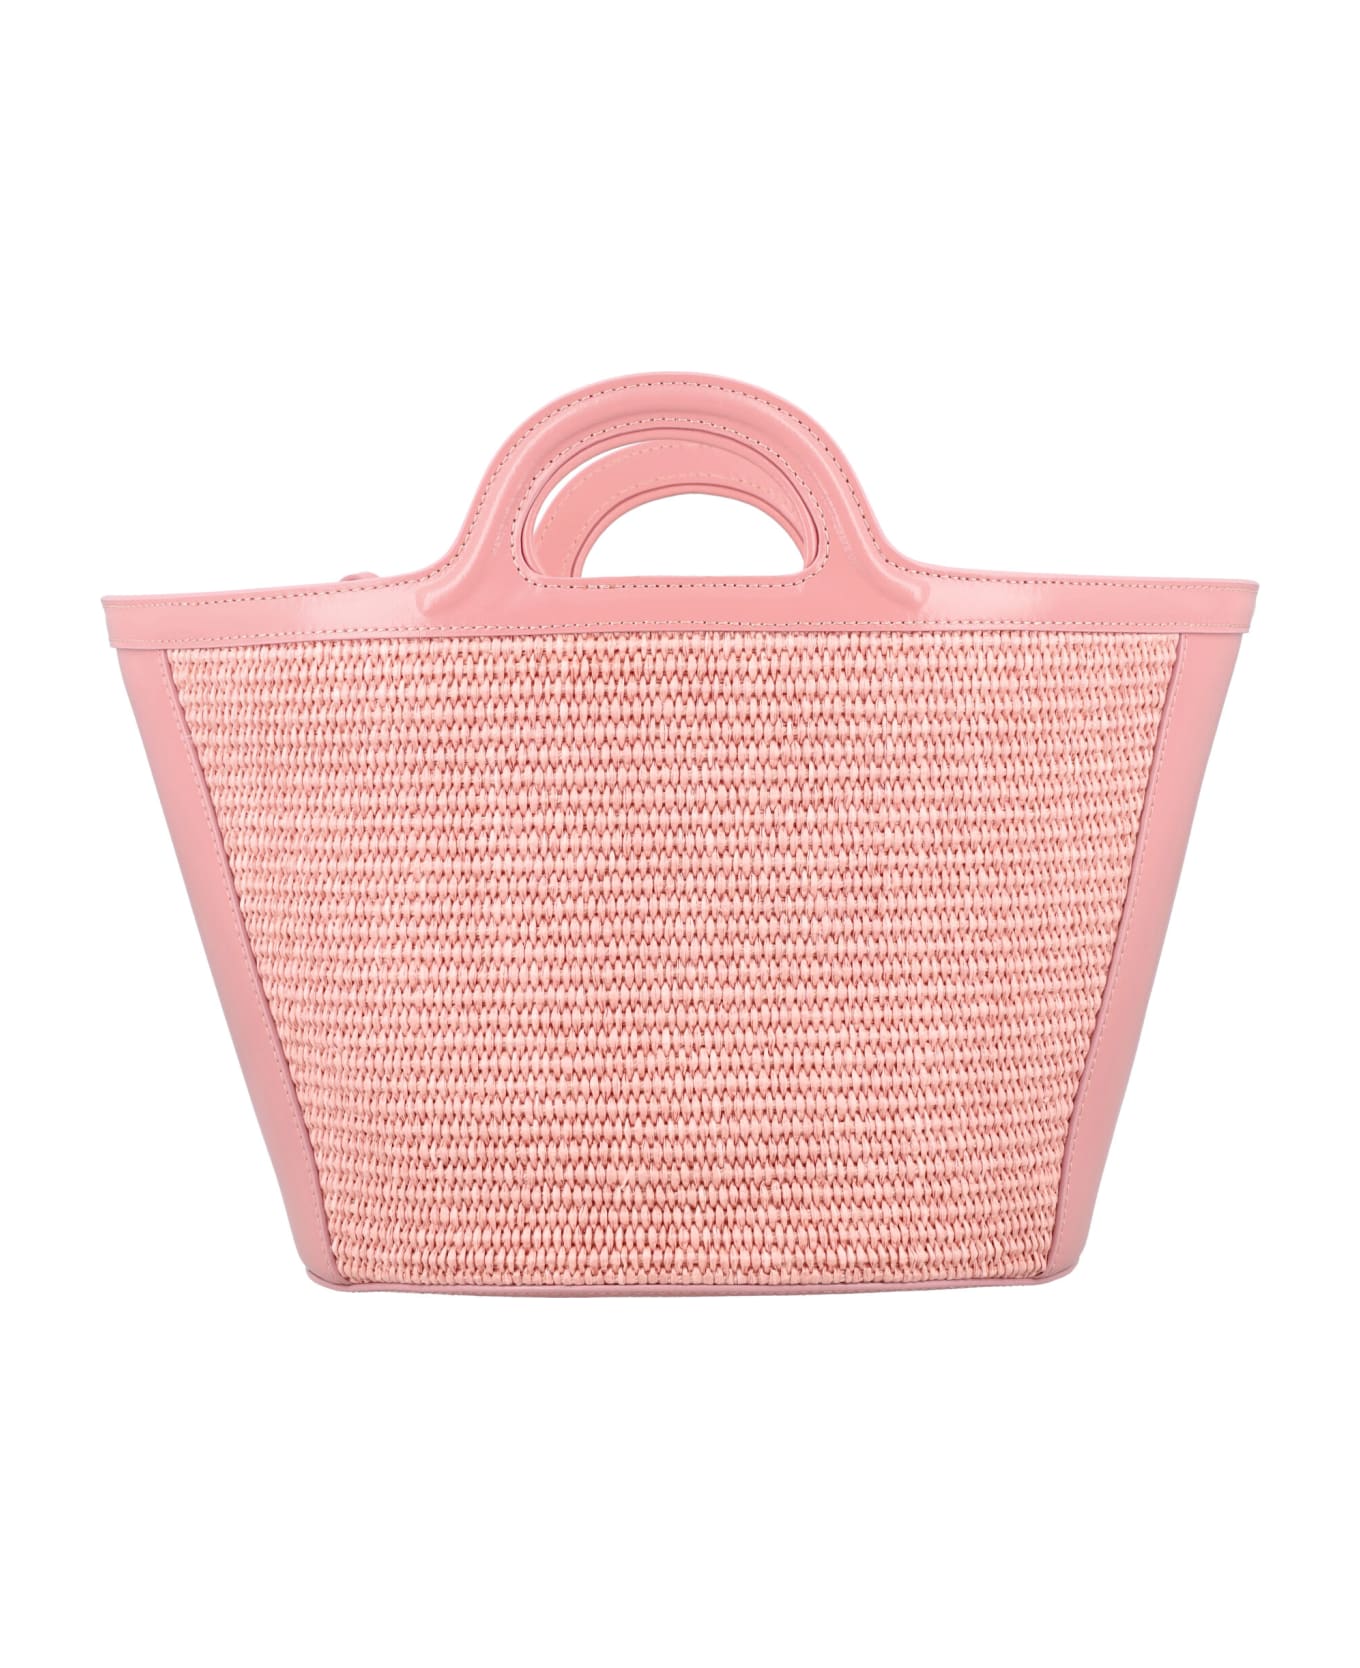 Marni Tropicalia Micro Bag In Leather And Raffia - PALE PINK トートバッグ